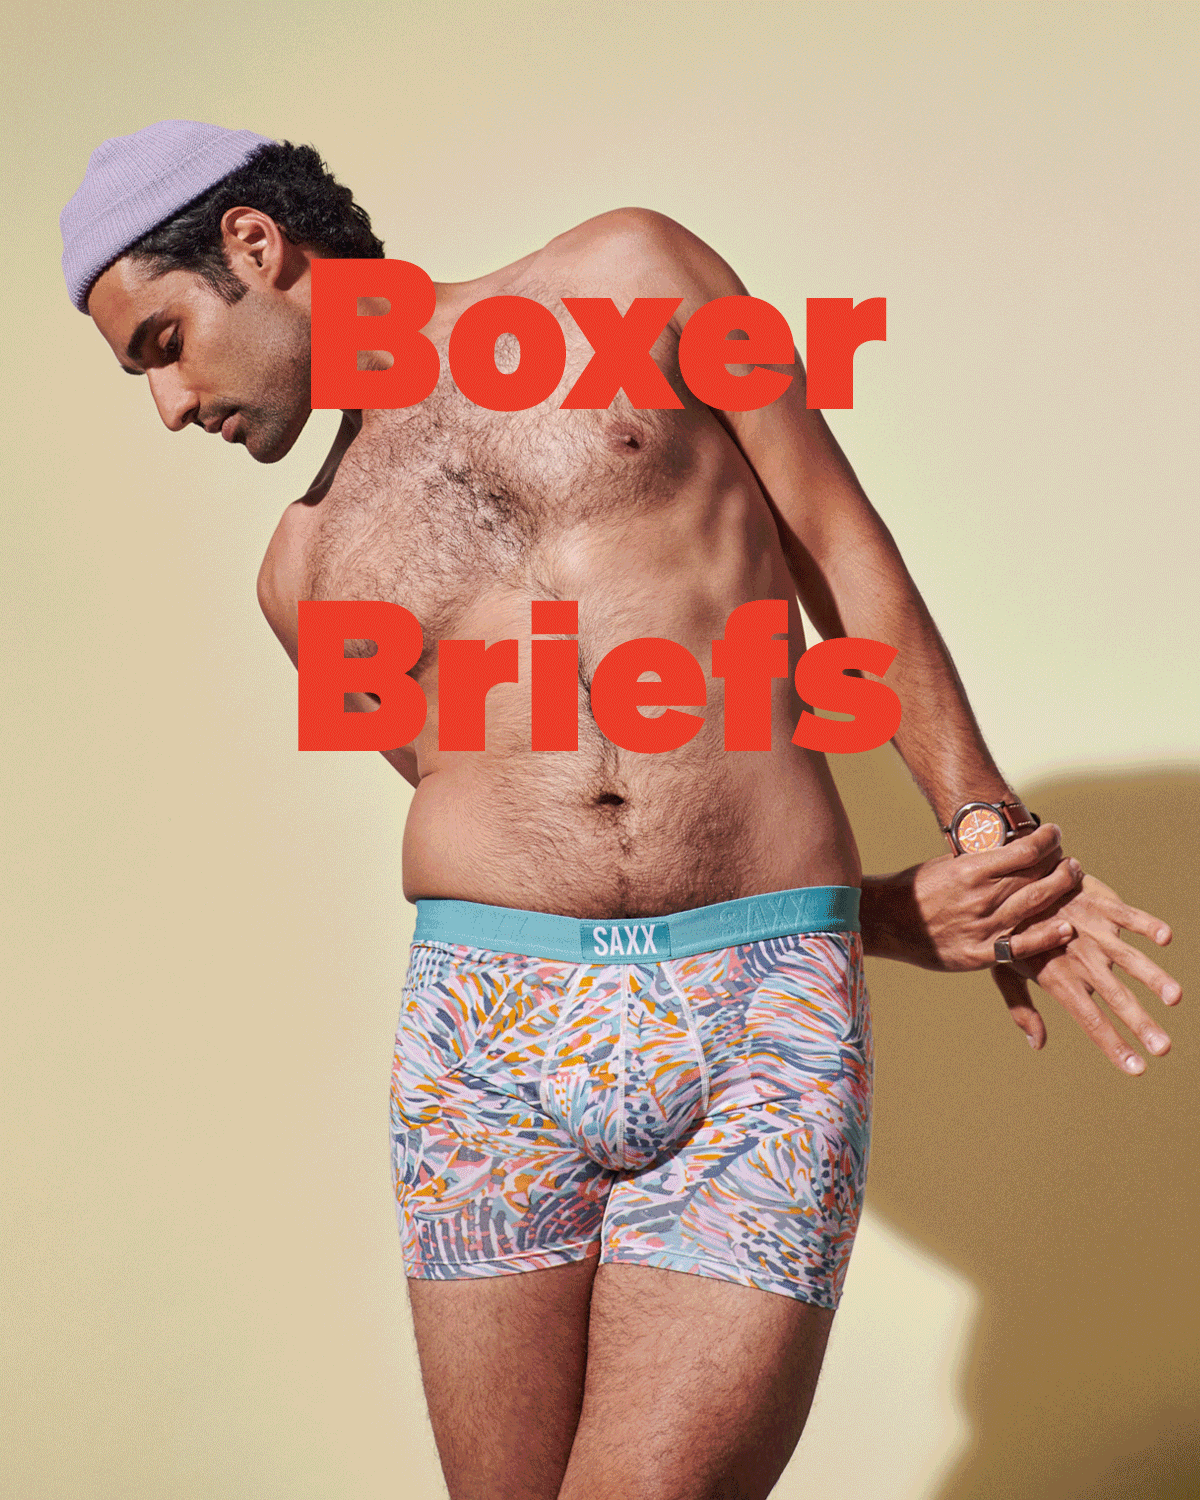 Saxx boxers are on sale for Black Friday for up to 40% off on